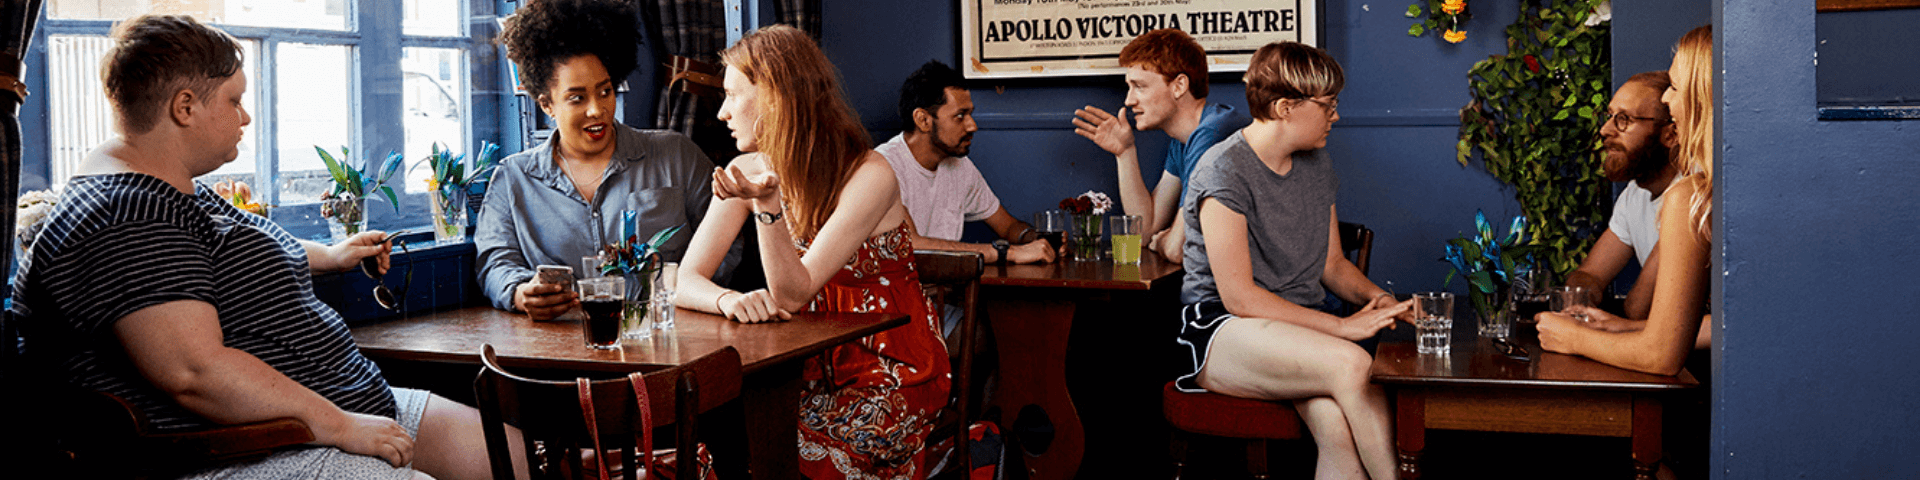 Group of people sitting together in a pub